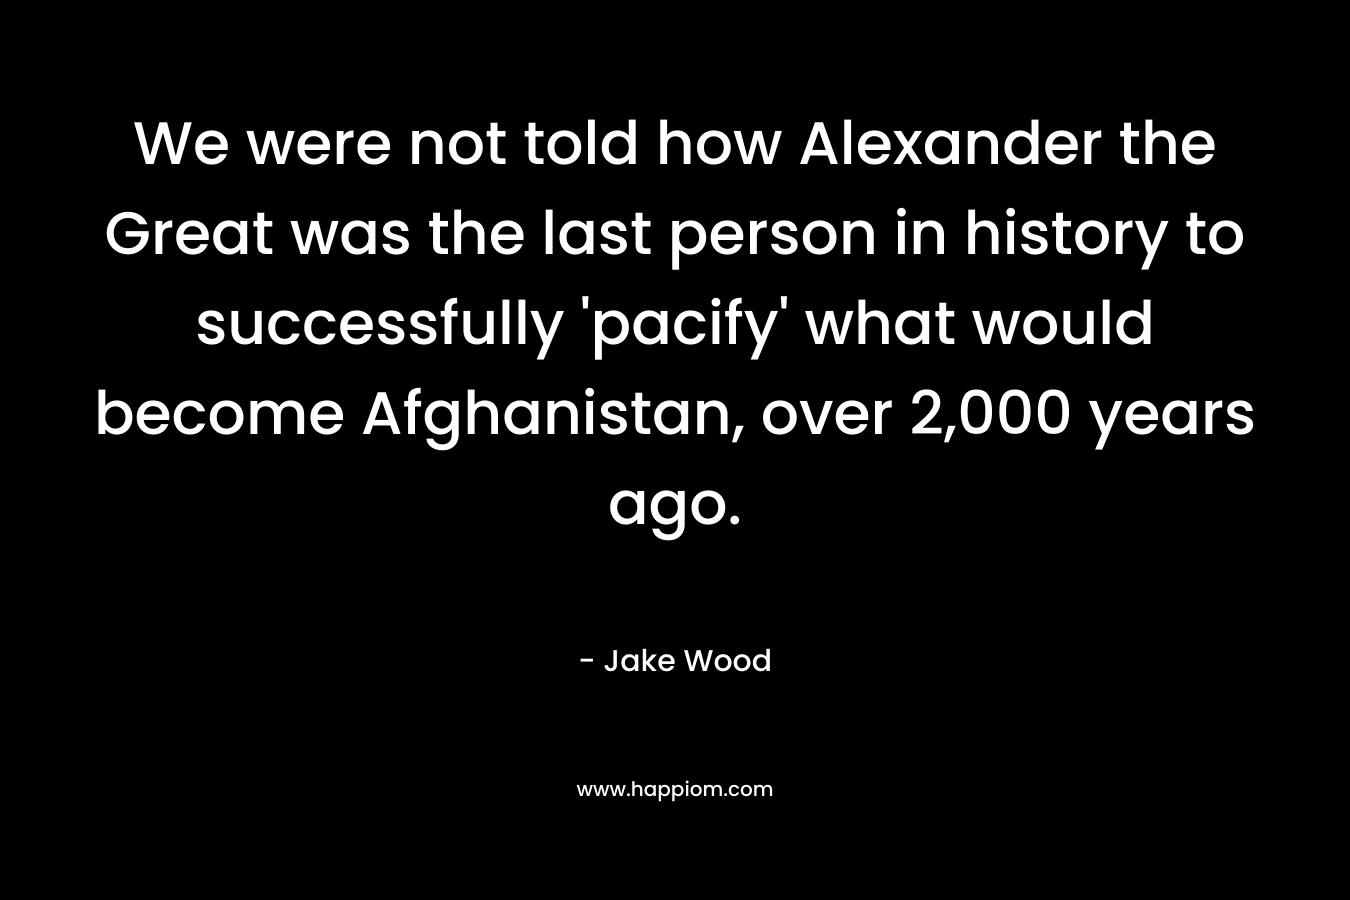 We were not told how Alexander the Great was the last person in history to successfully ‘pacify’ what would become Afghanistan, over 2,000 years ago. – Jake Wood